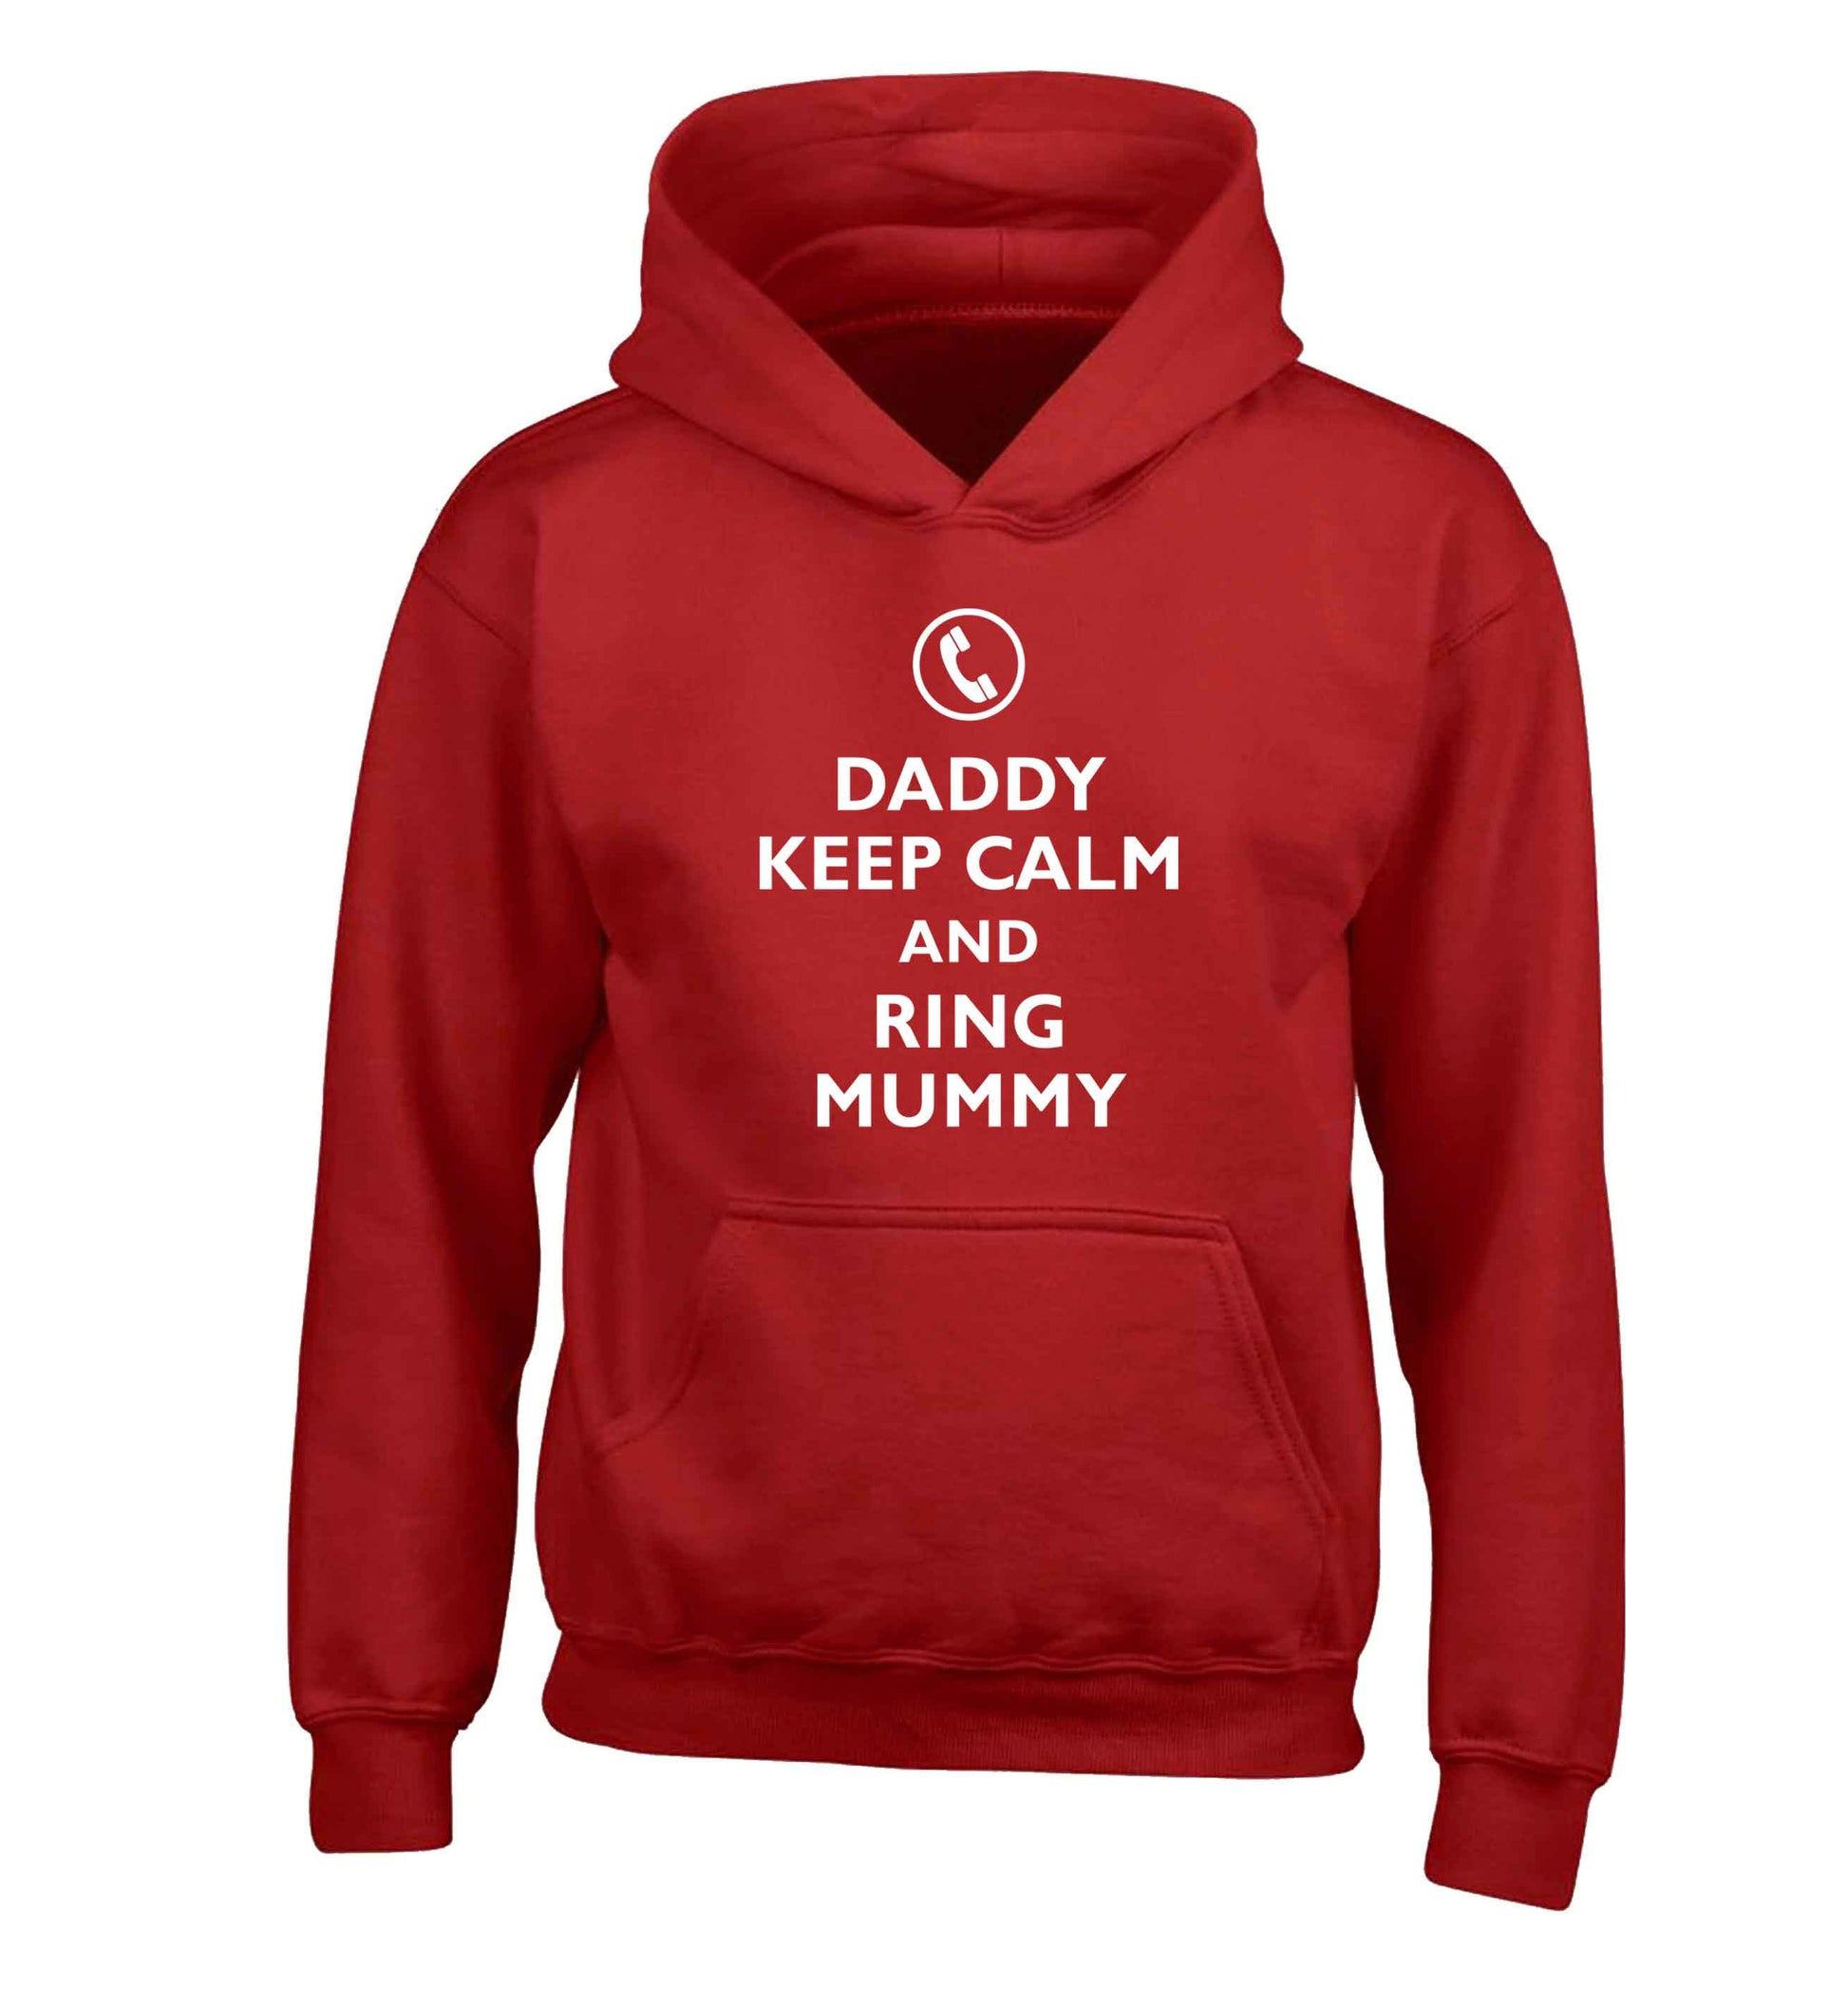 Daddy keep calm and ring mummy children's red hoodie 12-13 Years